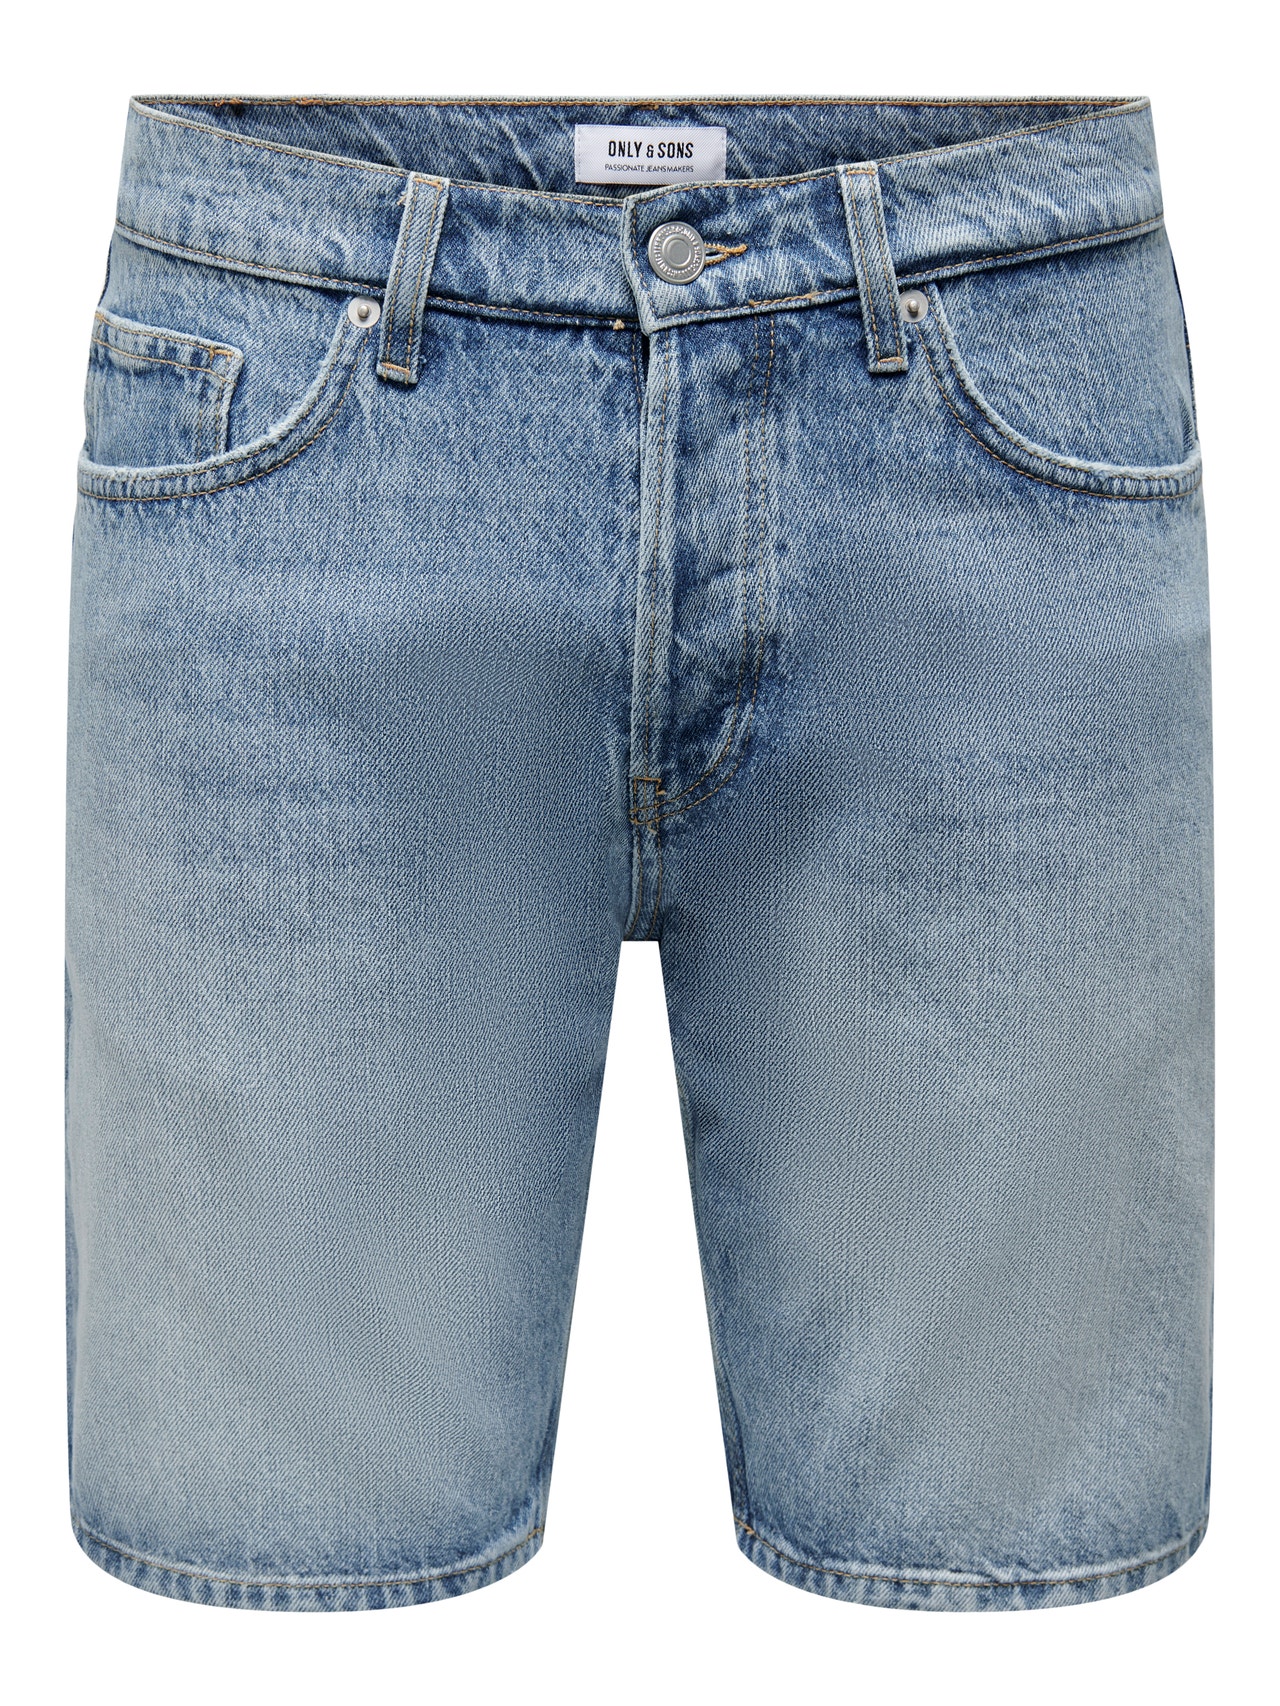 ONLY & SONS Shorts Straight Fit Taille classique -Light Blue Denim - 22026092